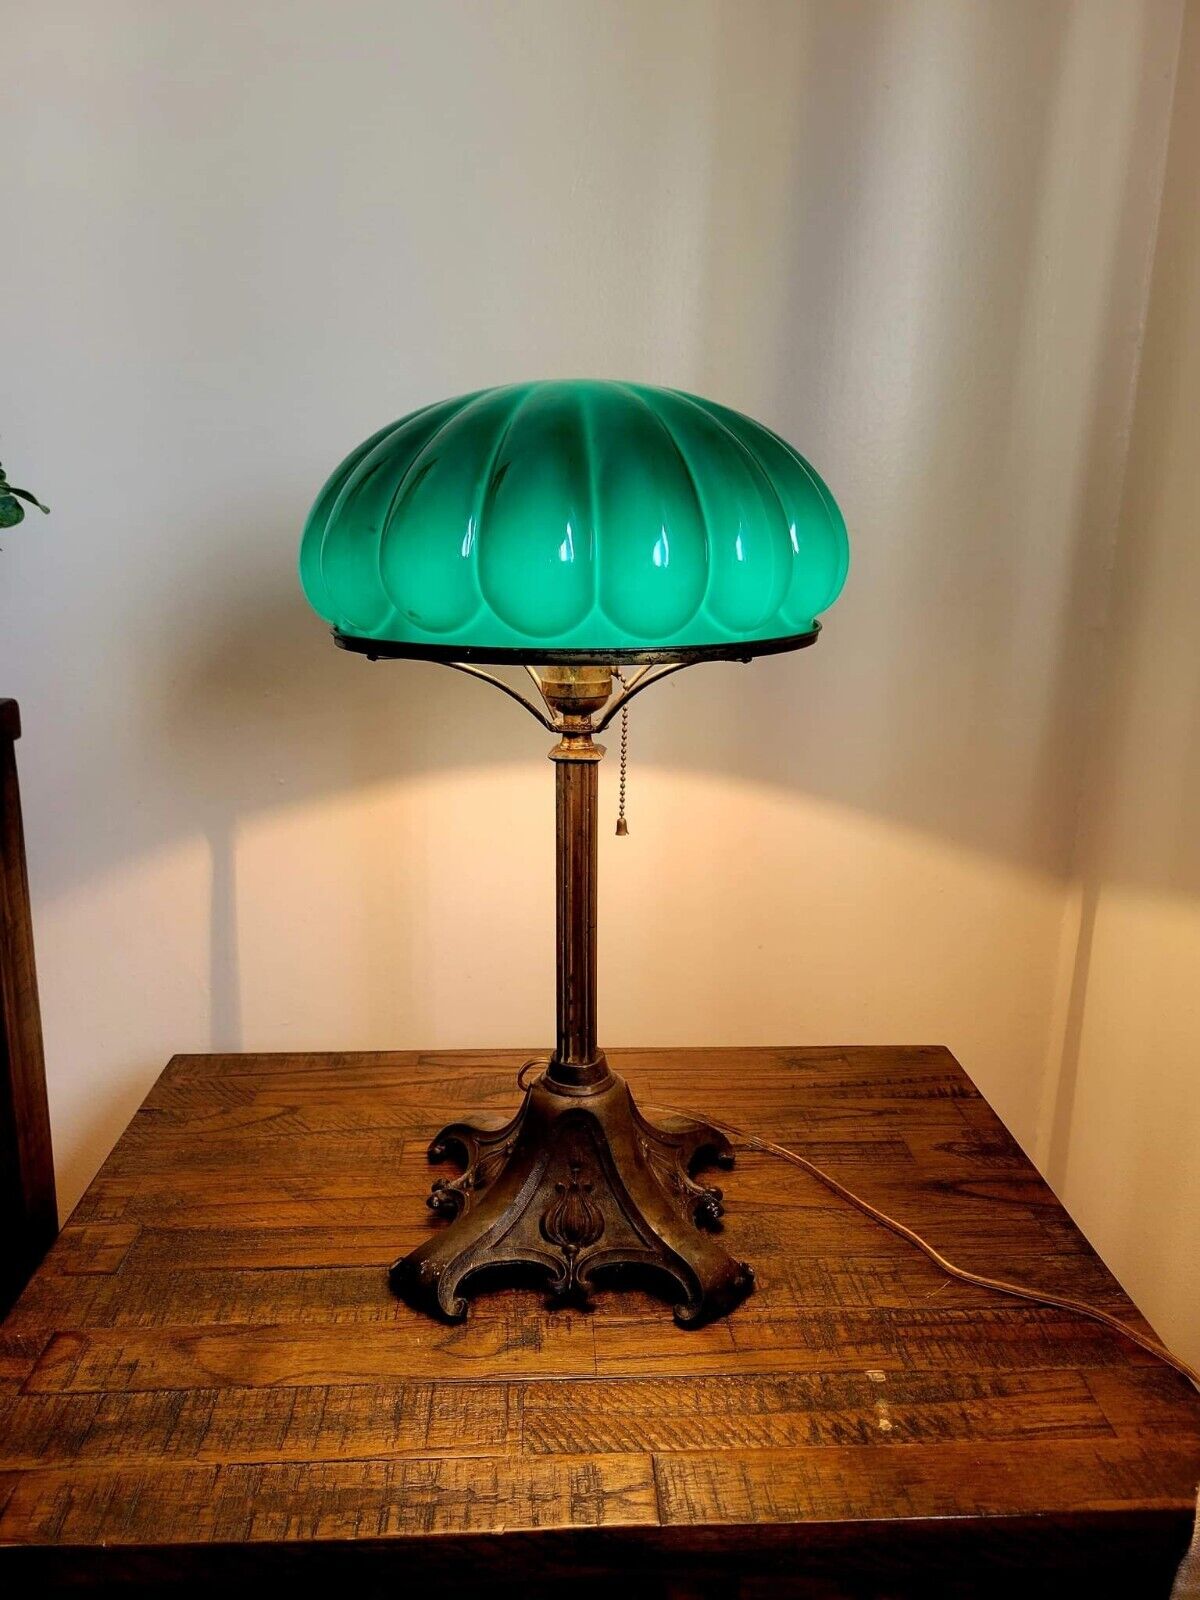 Antique 1910s Green Cased Glass Mushroom Dome Table Lamp Emeralite Style Shade